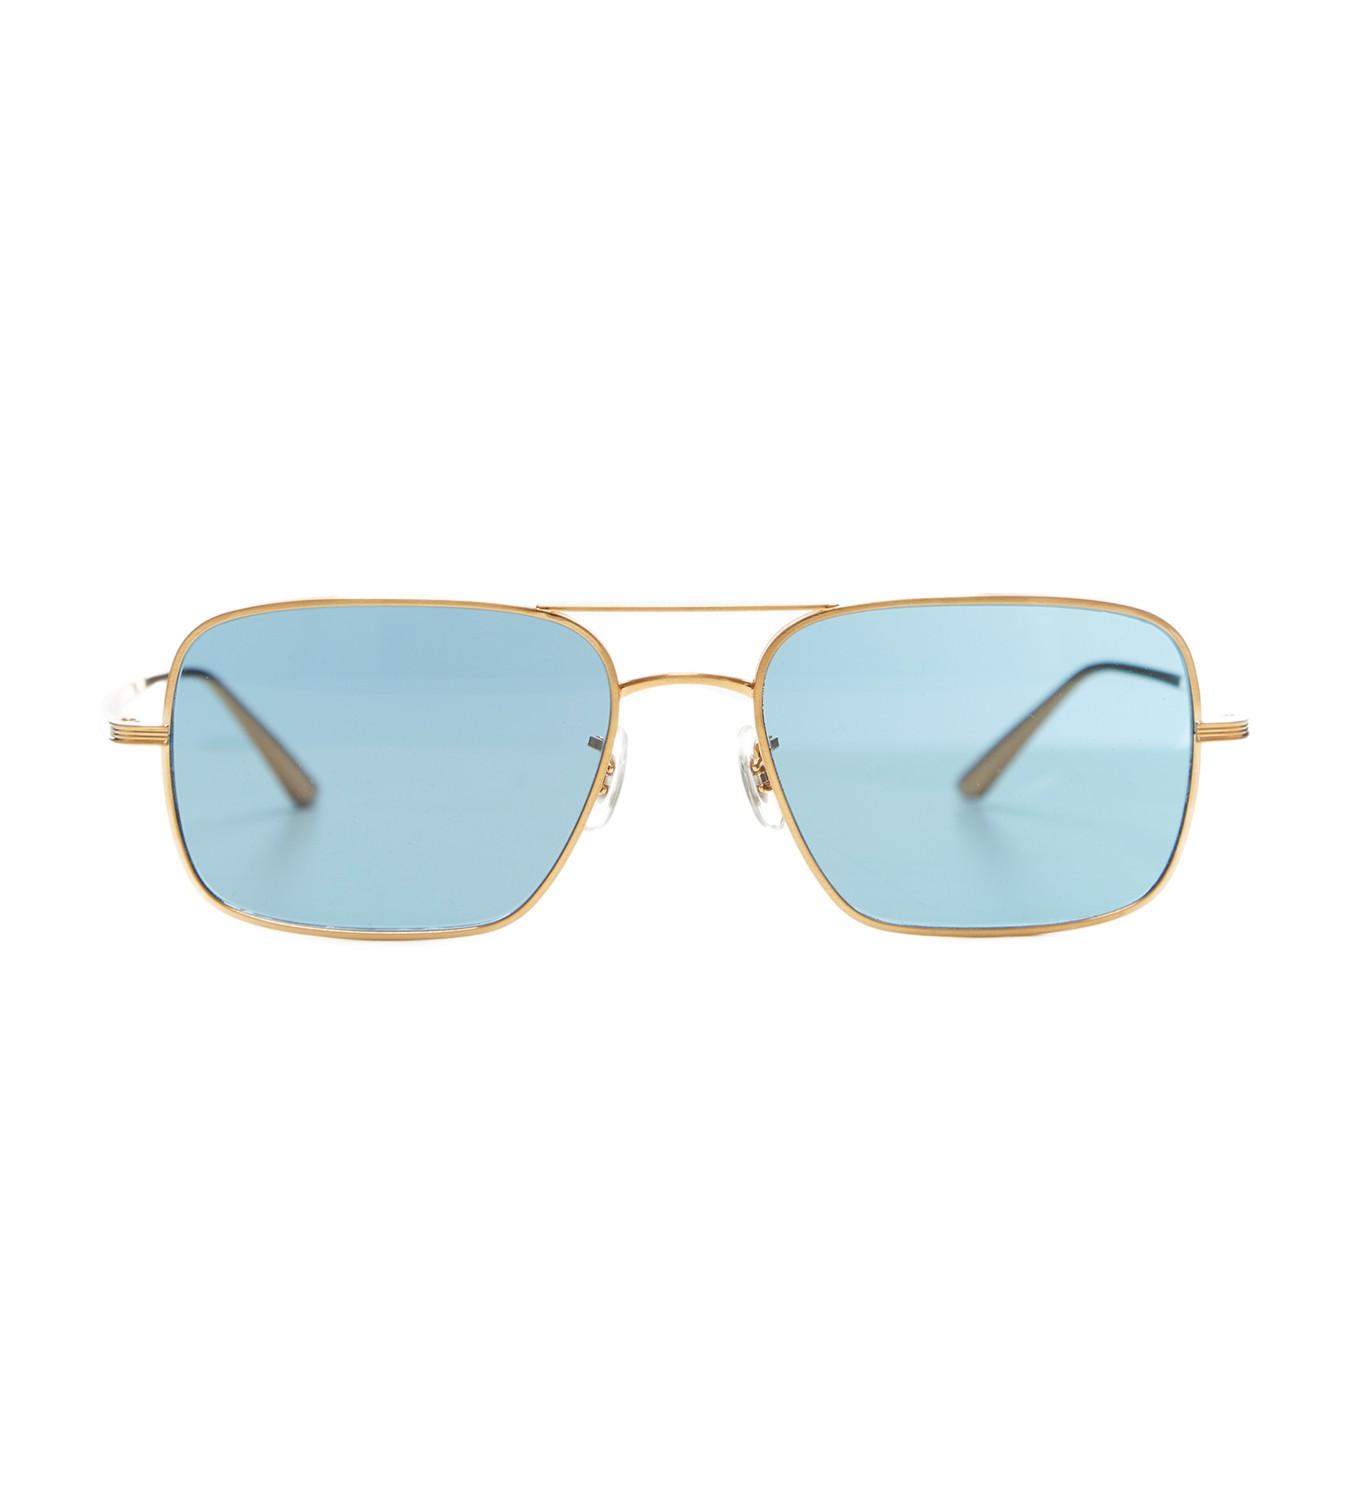 Oliver Peoples Victory Teal Sunglasses in Blue - Lyst